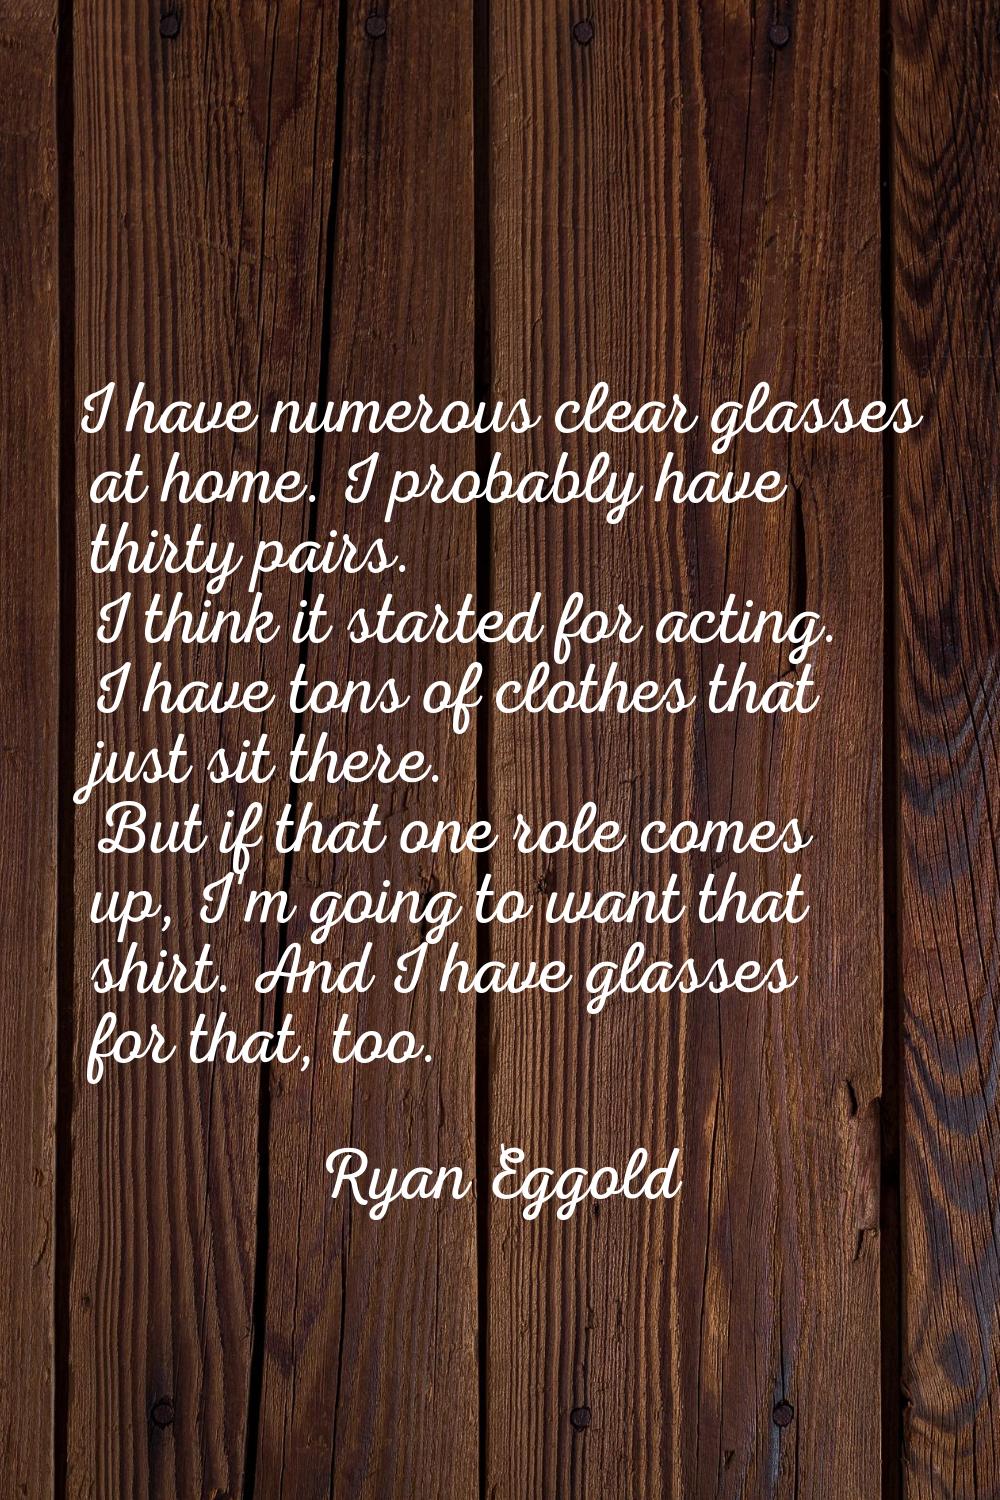 I have numerous clear glasses at home. I probably have thirty pairs. I think it started for acting.